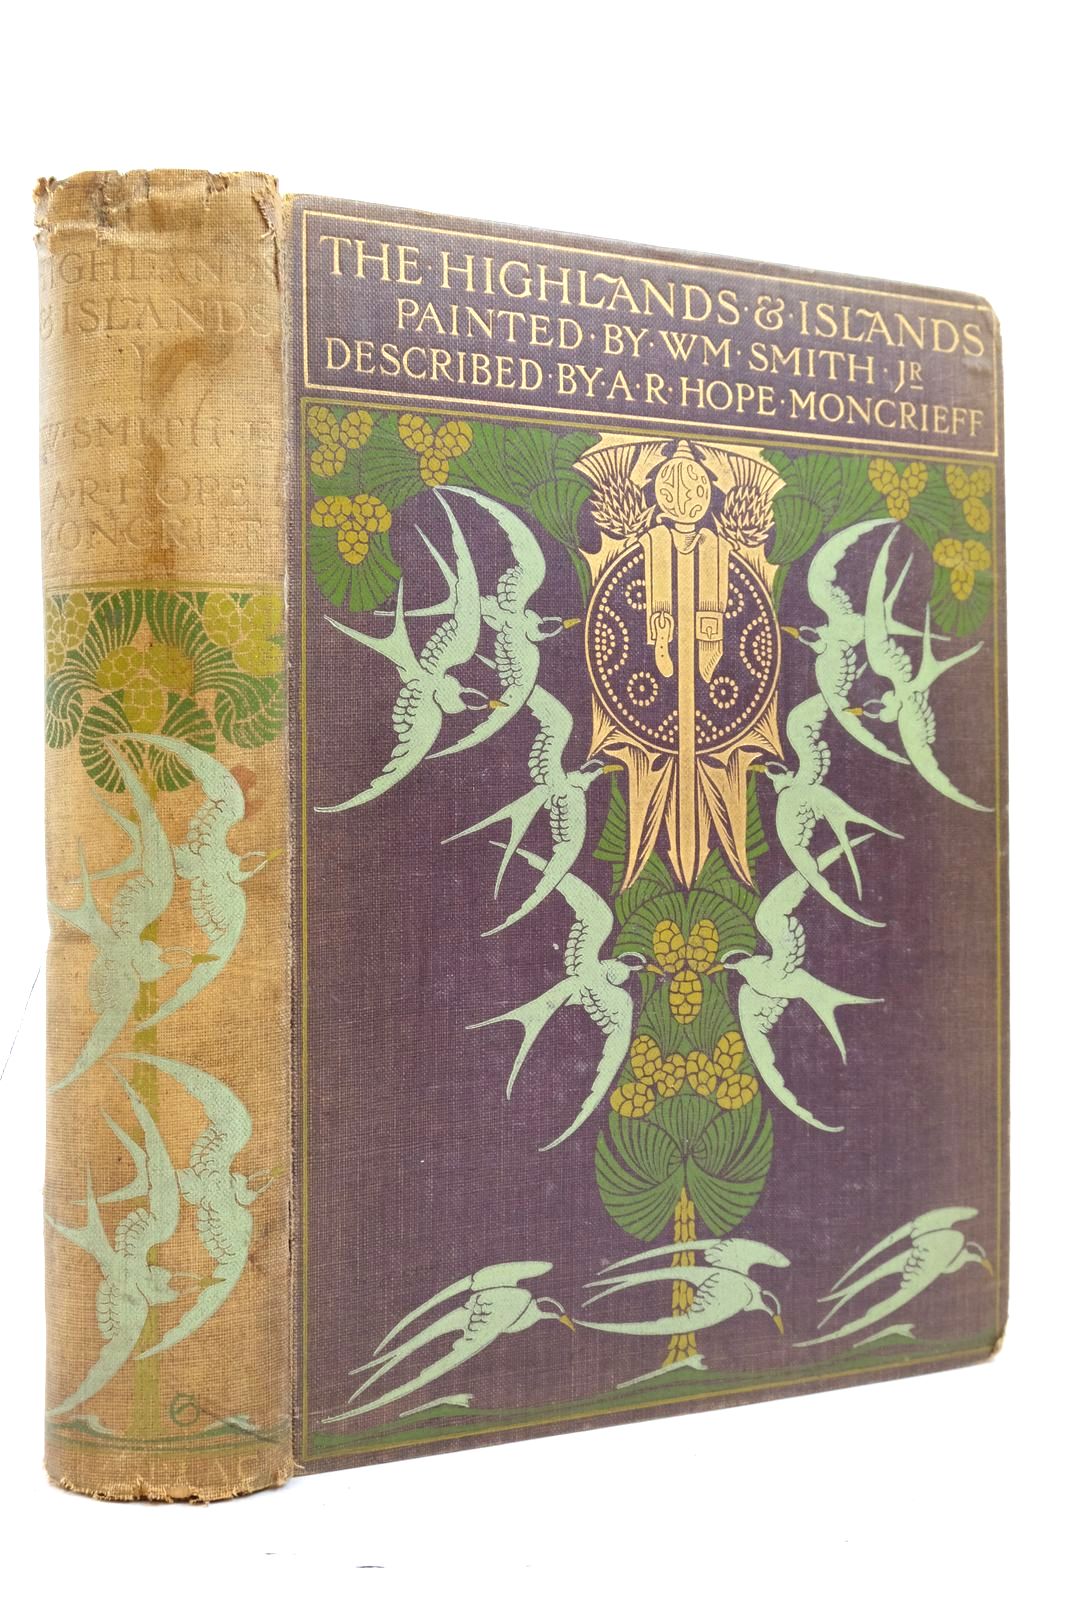 Photo of THE HIGHLANDS AND ISLANDS OF SCOTLAND written by Moncrieff, A.R. Hope illustrated by Smith, W. published by A. & C. Black (STOCK CODE: 2137421)  for sale by Stella & Rose's Books